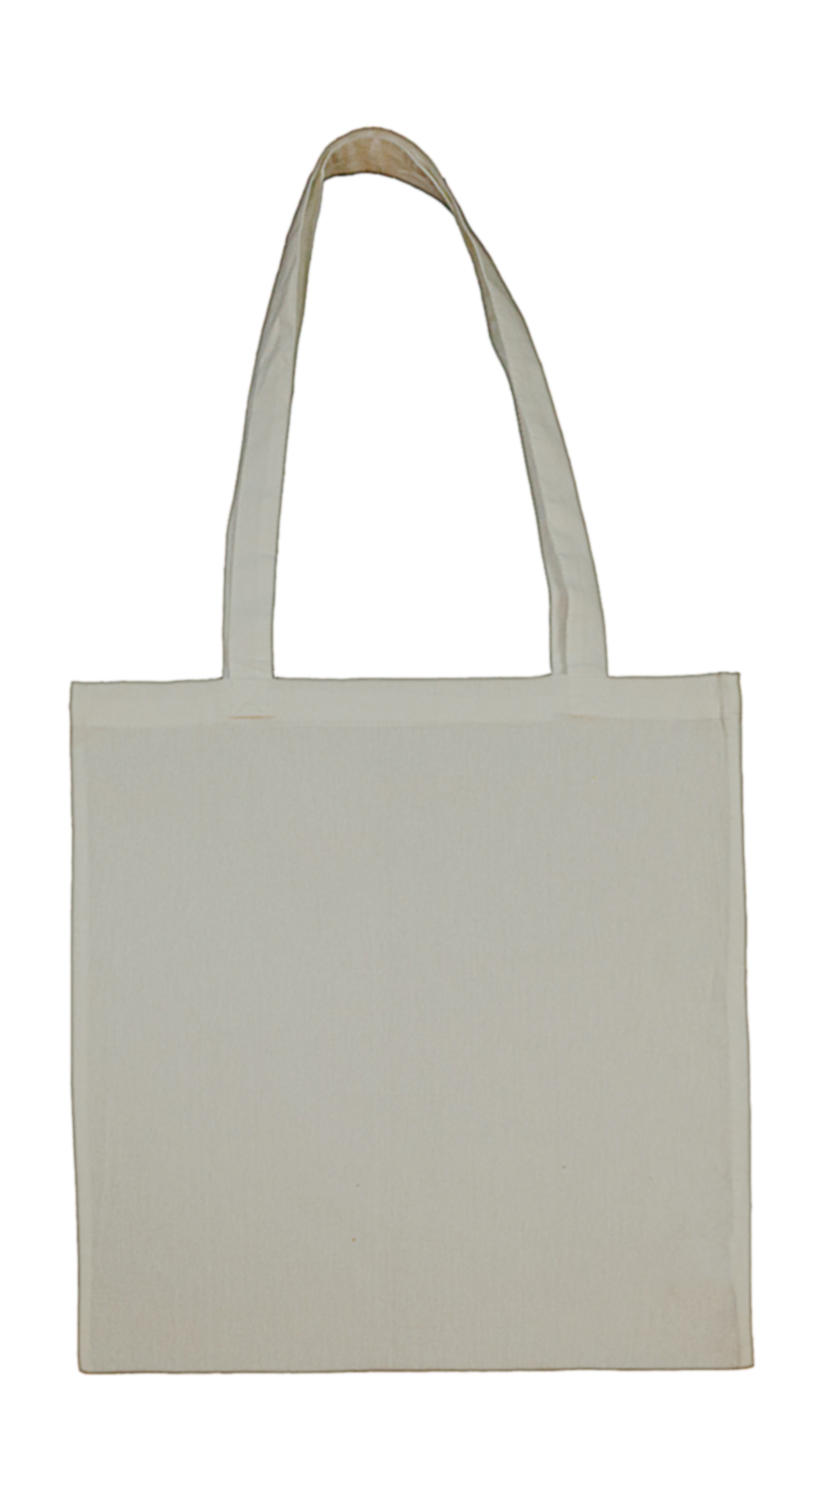  Cotton Bag LH in Farbe Light Grey